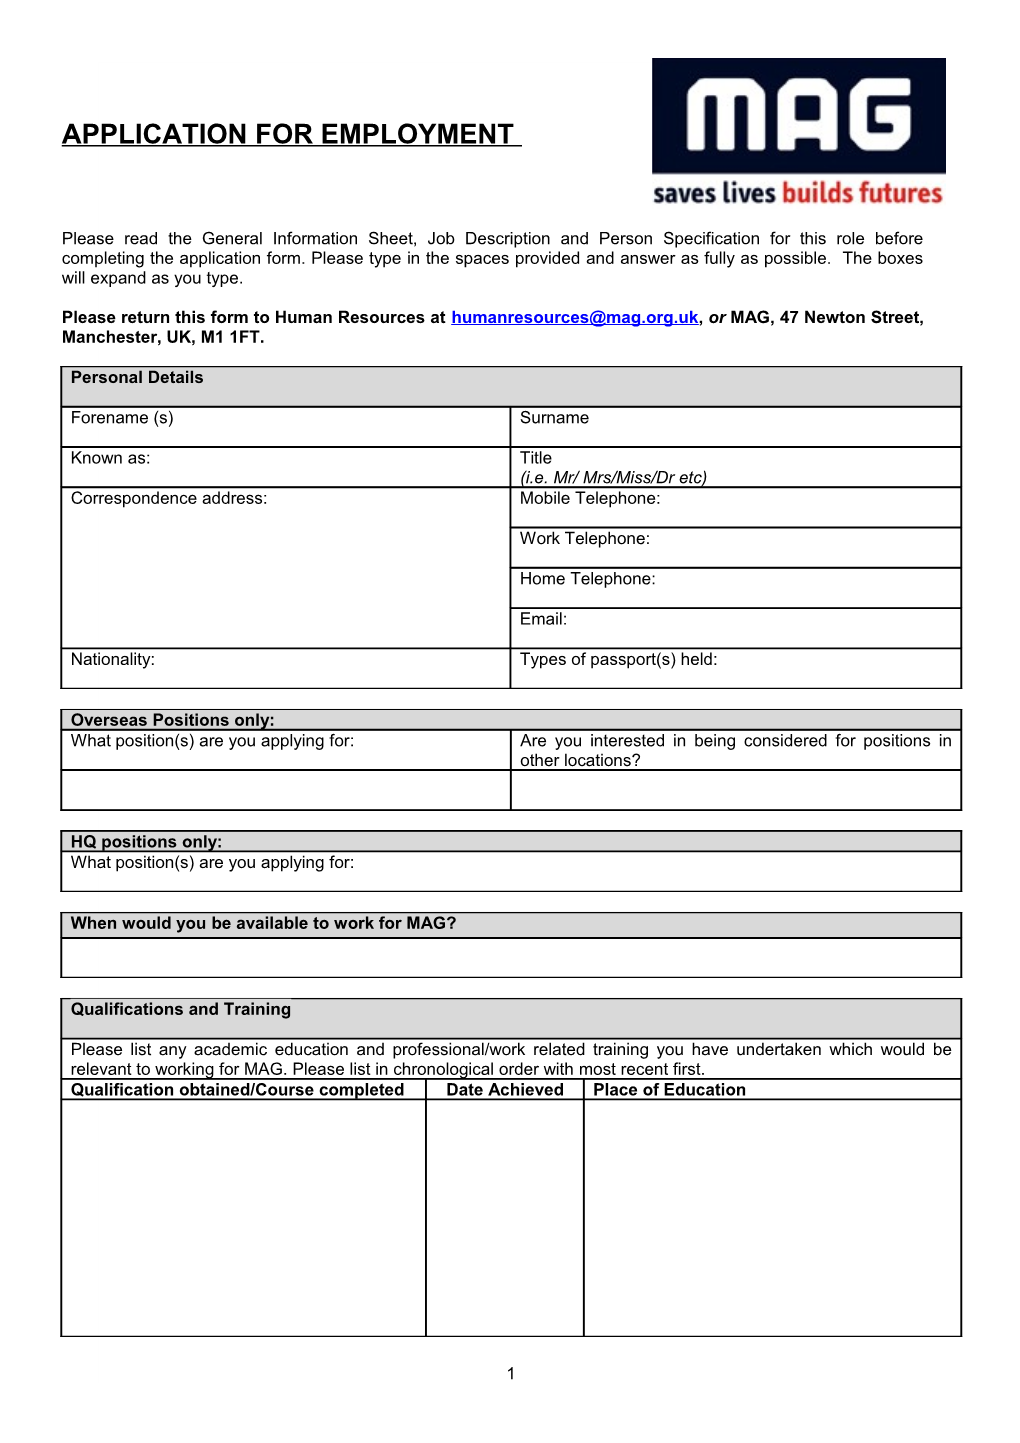 Please Return This Form to Human Resourcesat , Ormag, 47 Newton Street, Manchester, UK